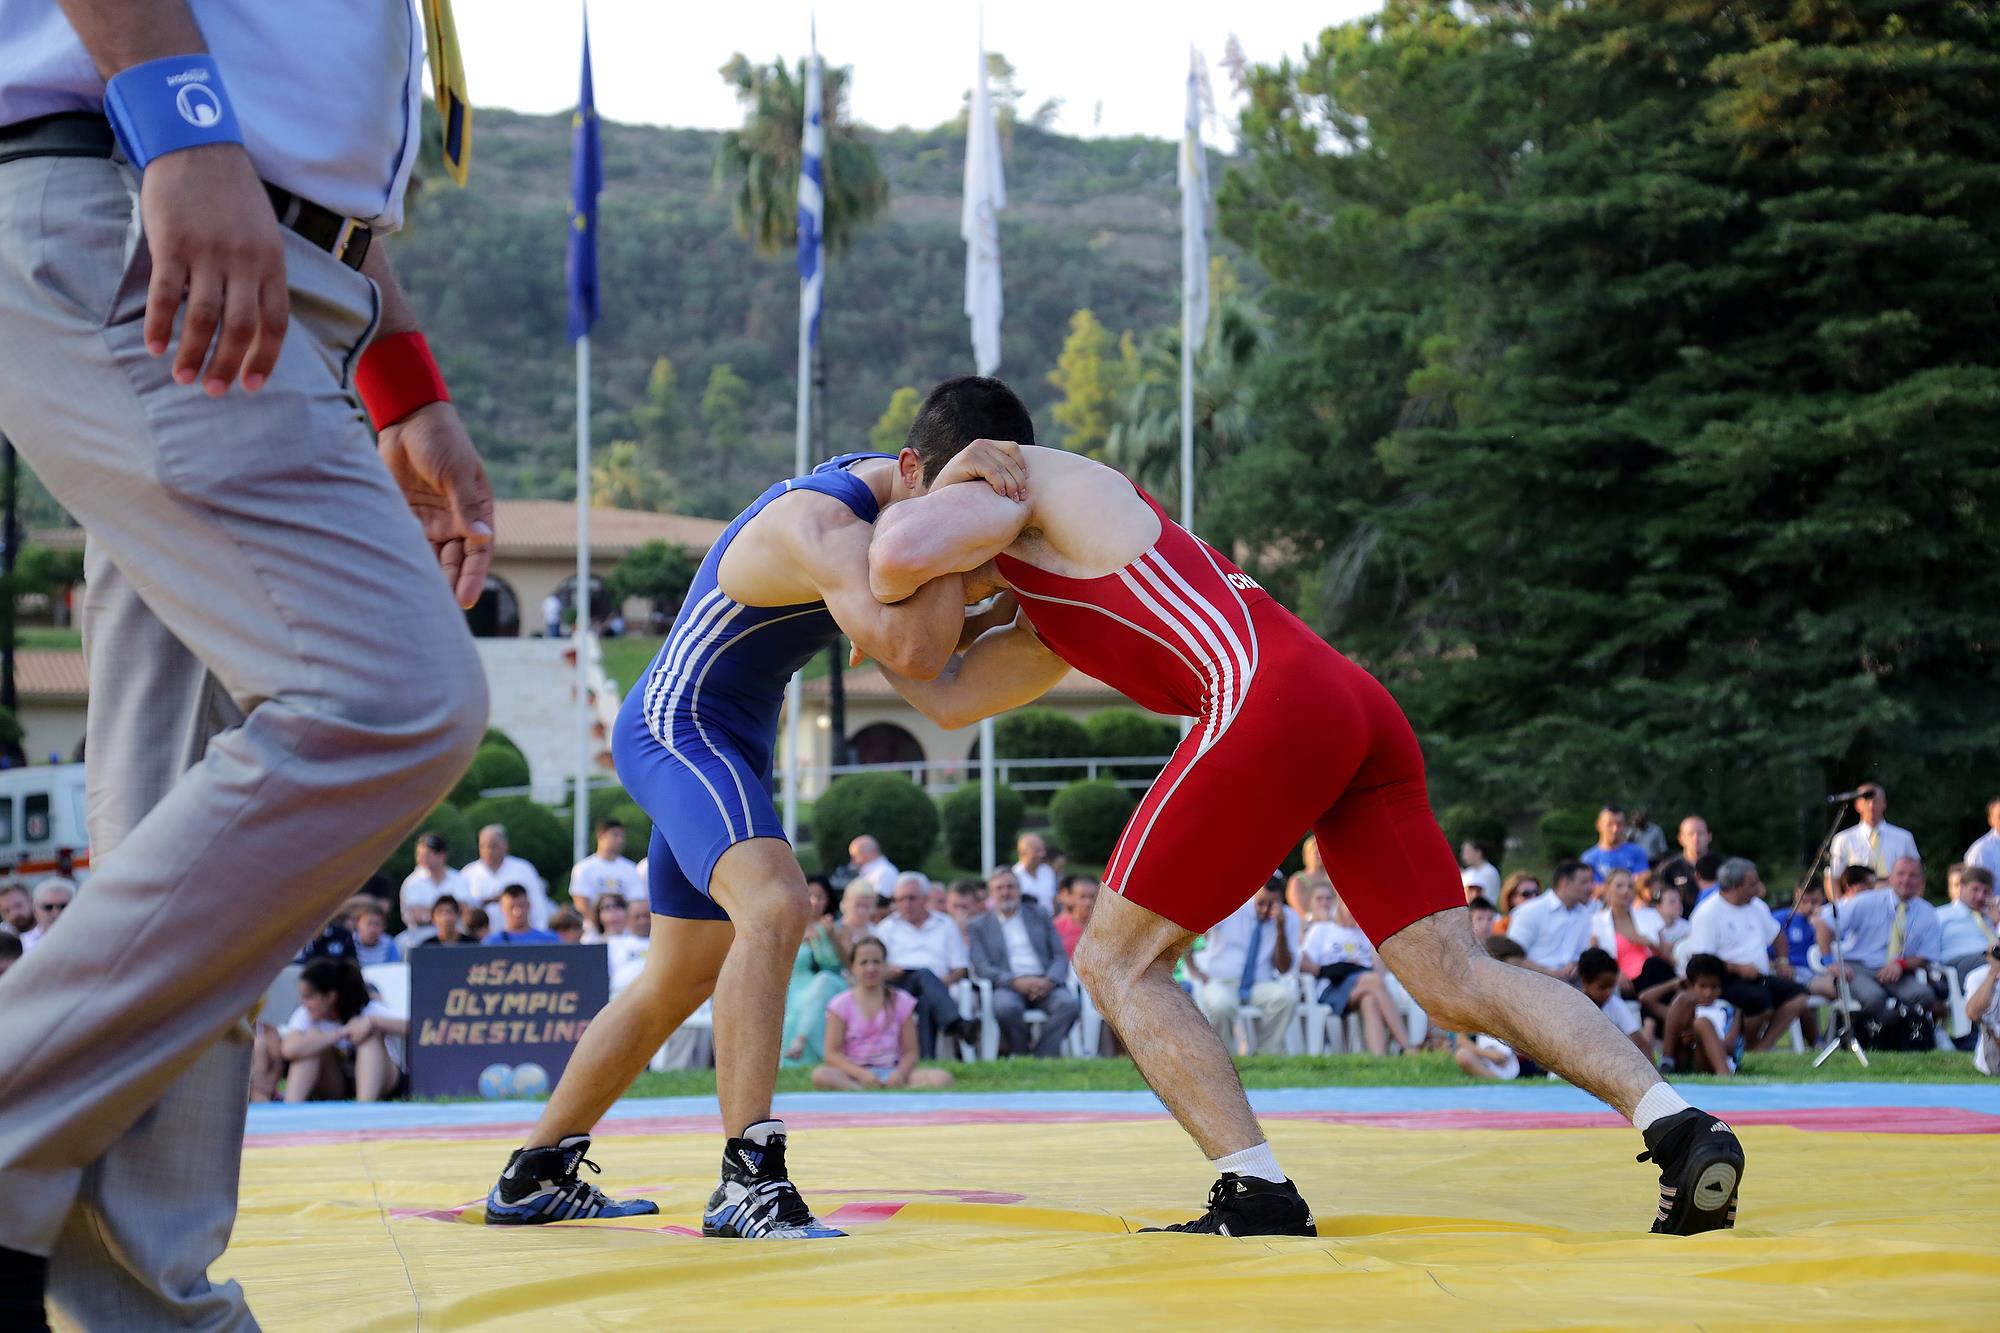 save olympic wrestling olympia